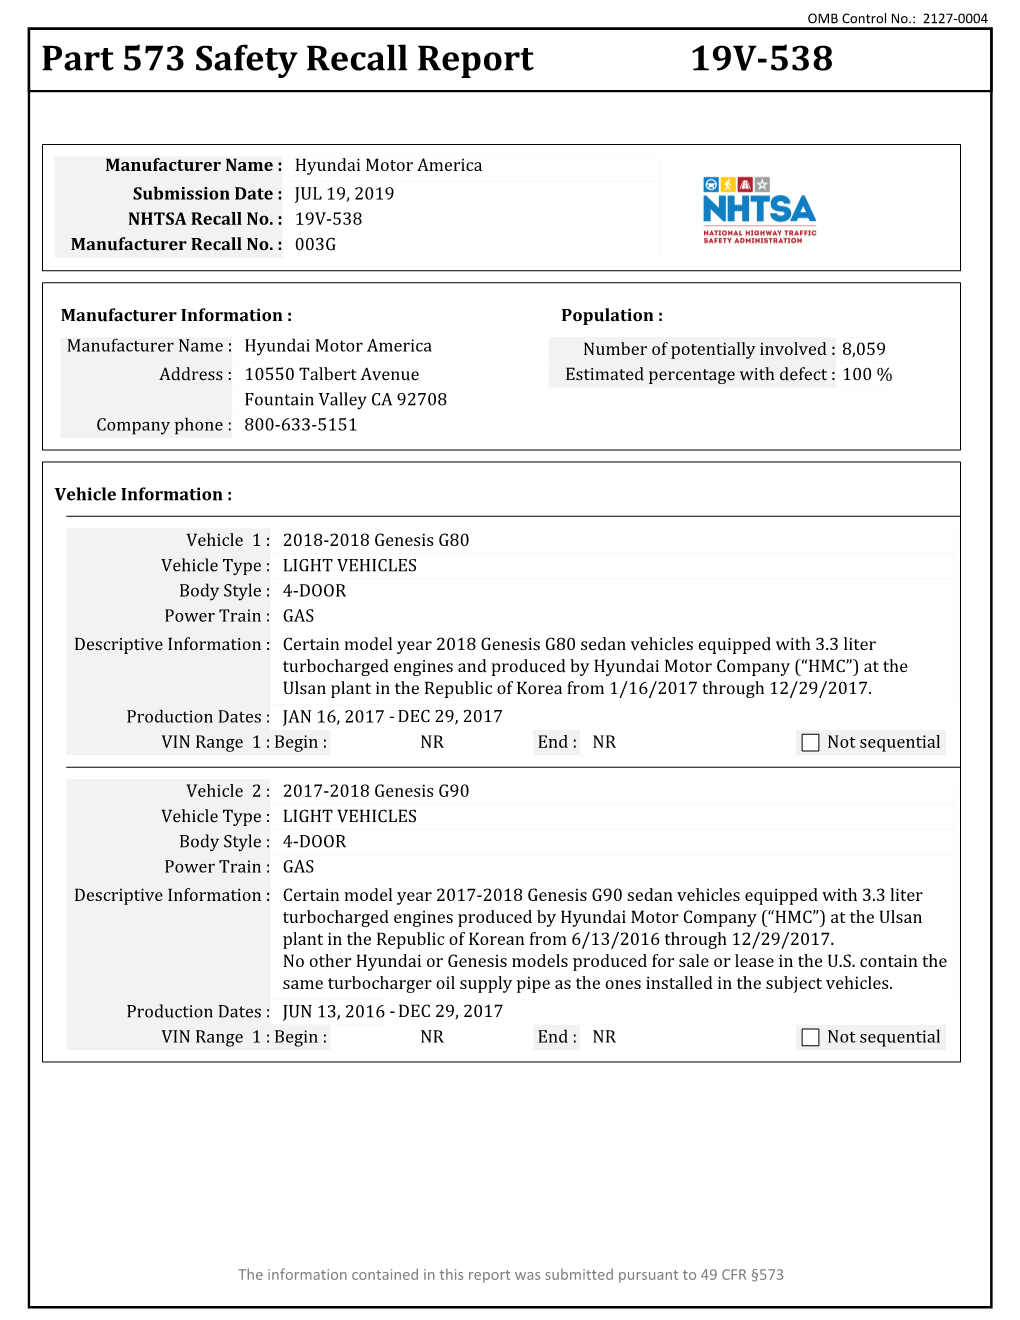 Part 573 Safety Recall Report 19V-538